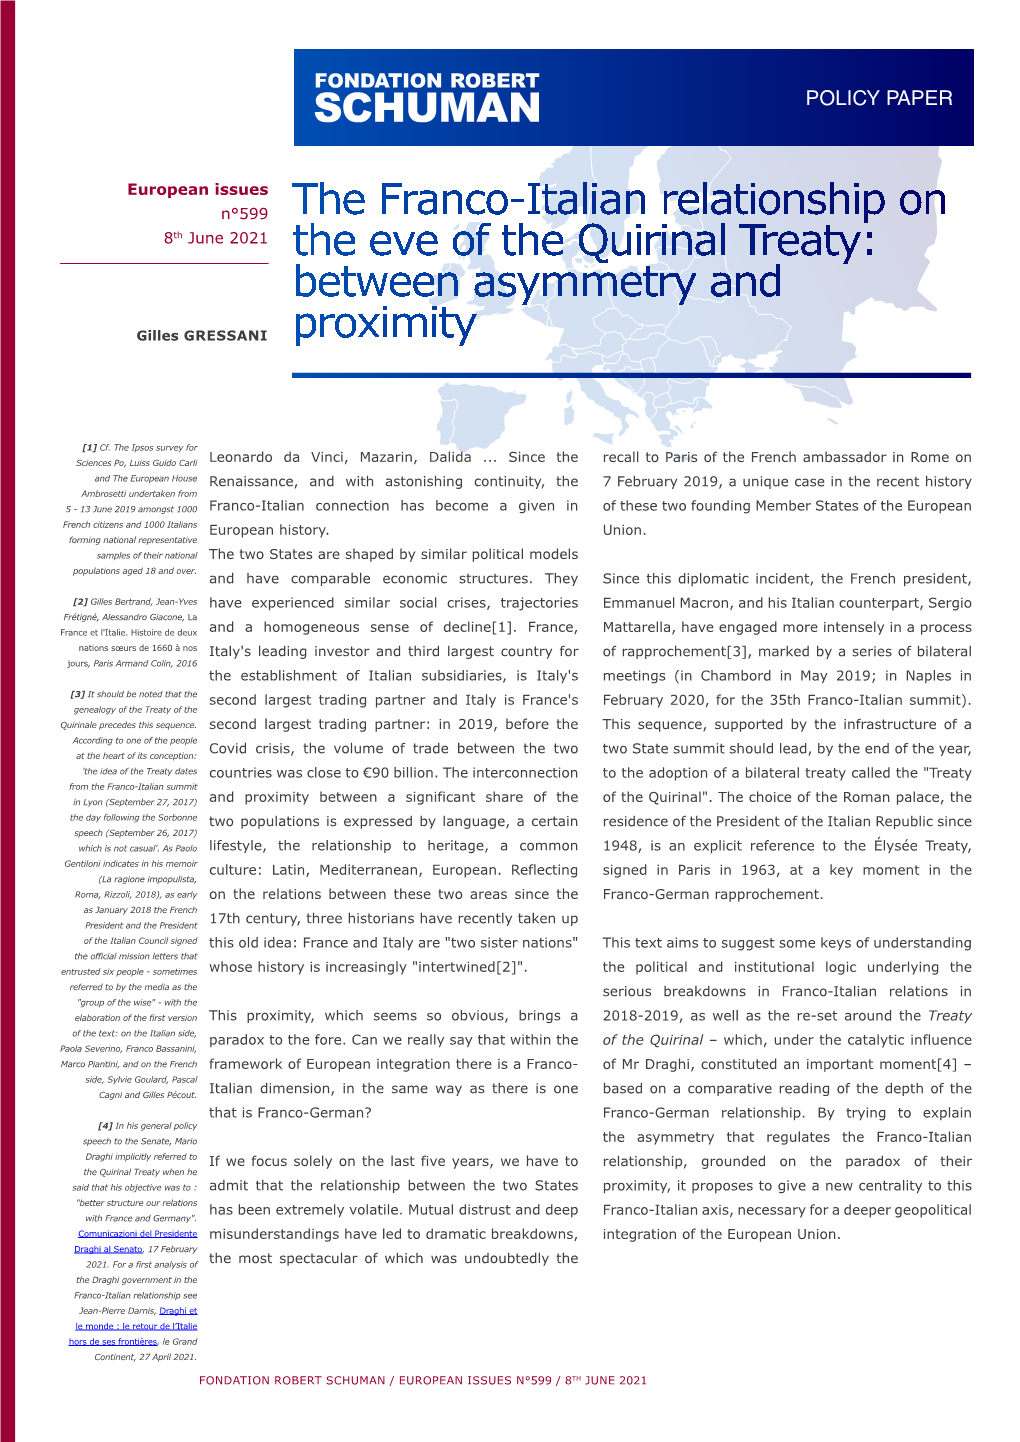 The Franco-Italian Relationship on the Eve of the Quirinal Treaty: Between Asymmetry and Proximity